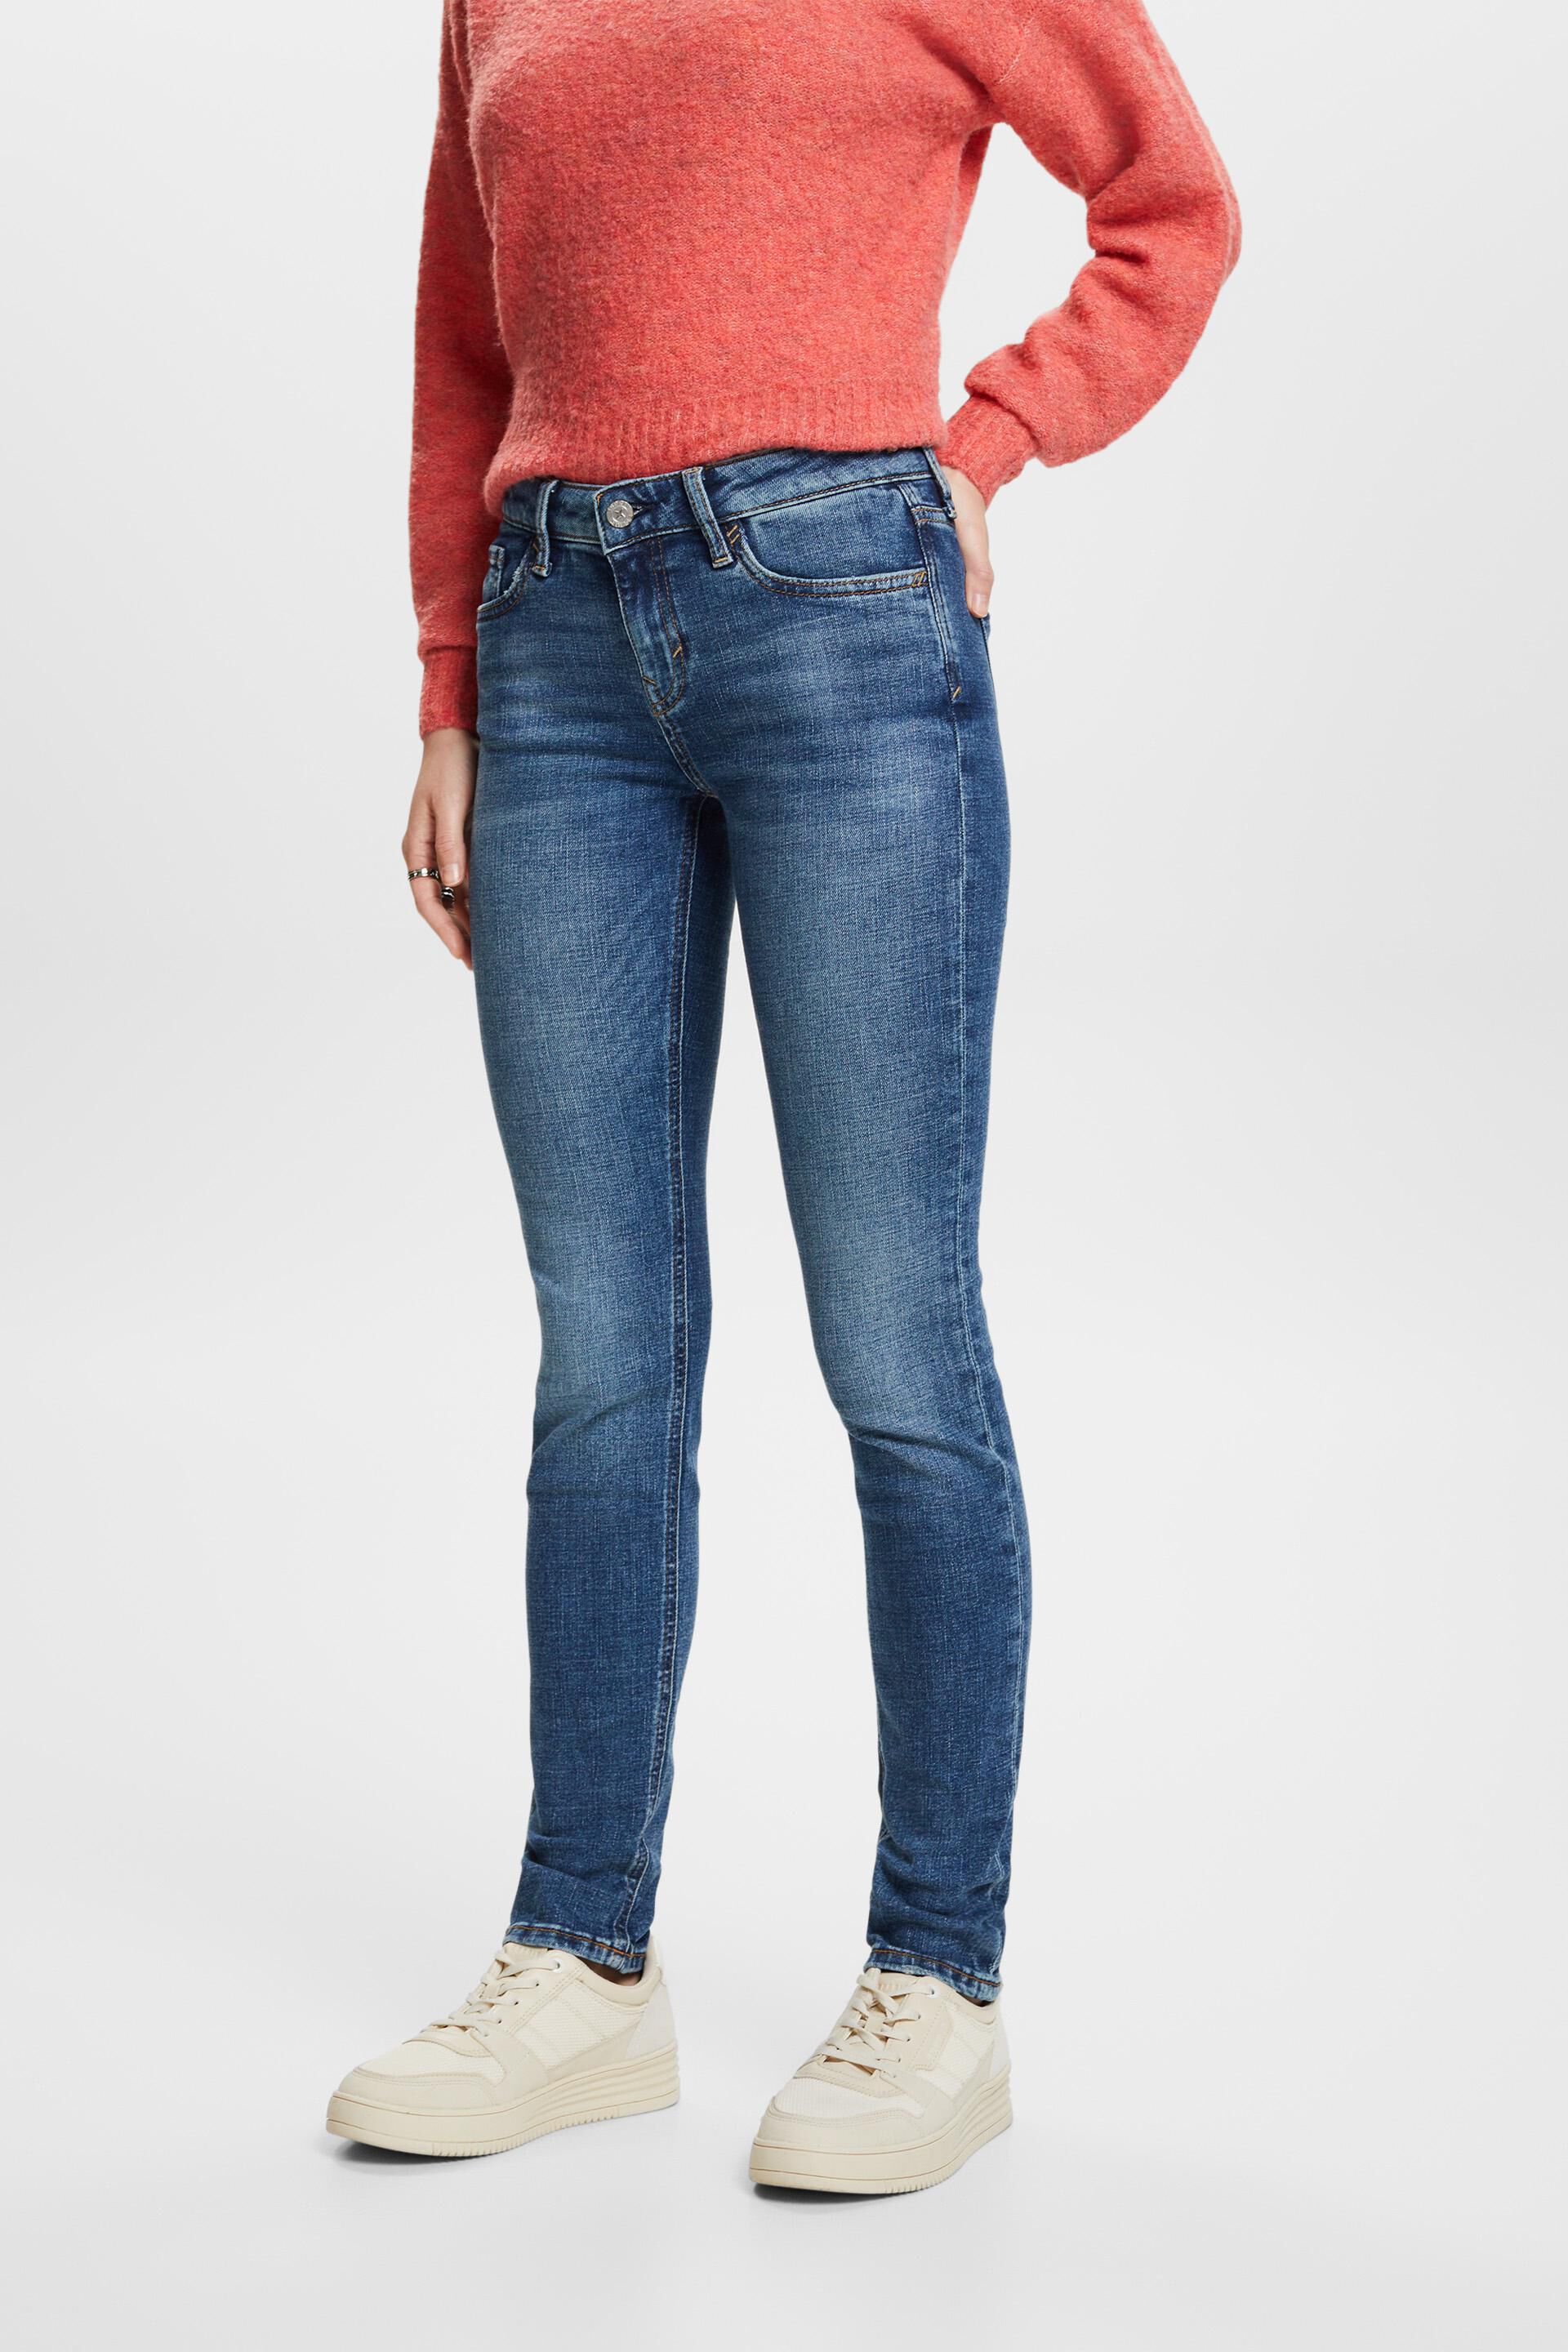 Esprit jeans stretch slim mid-rise Recycled: fit